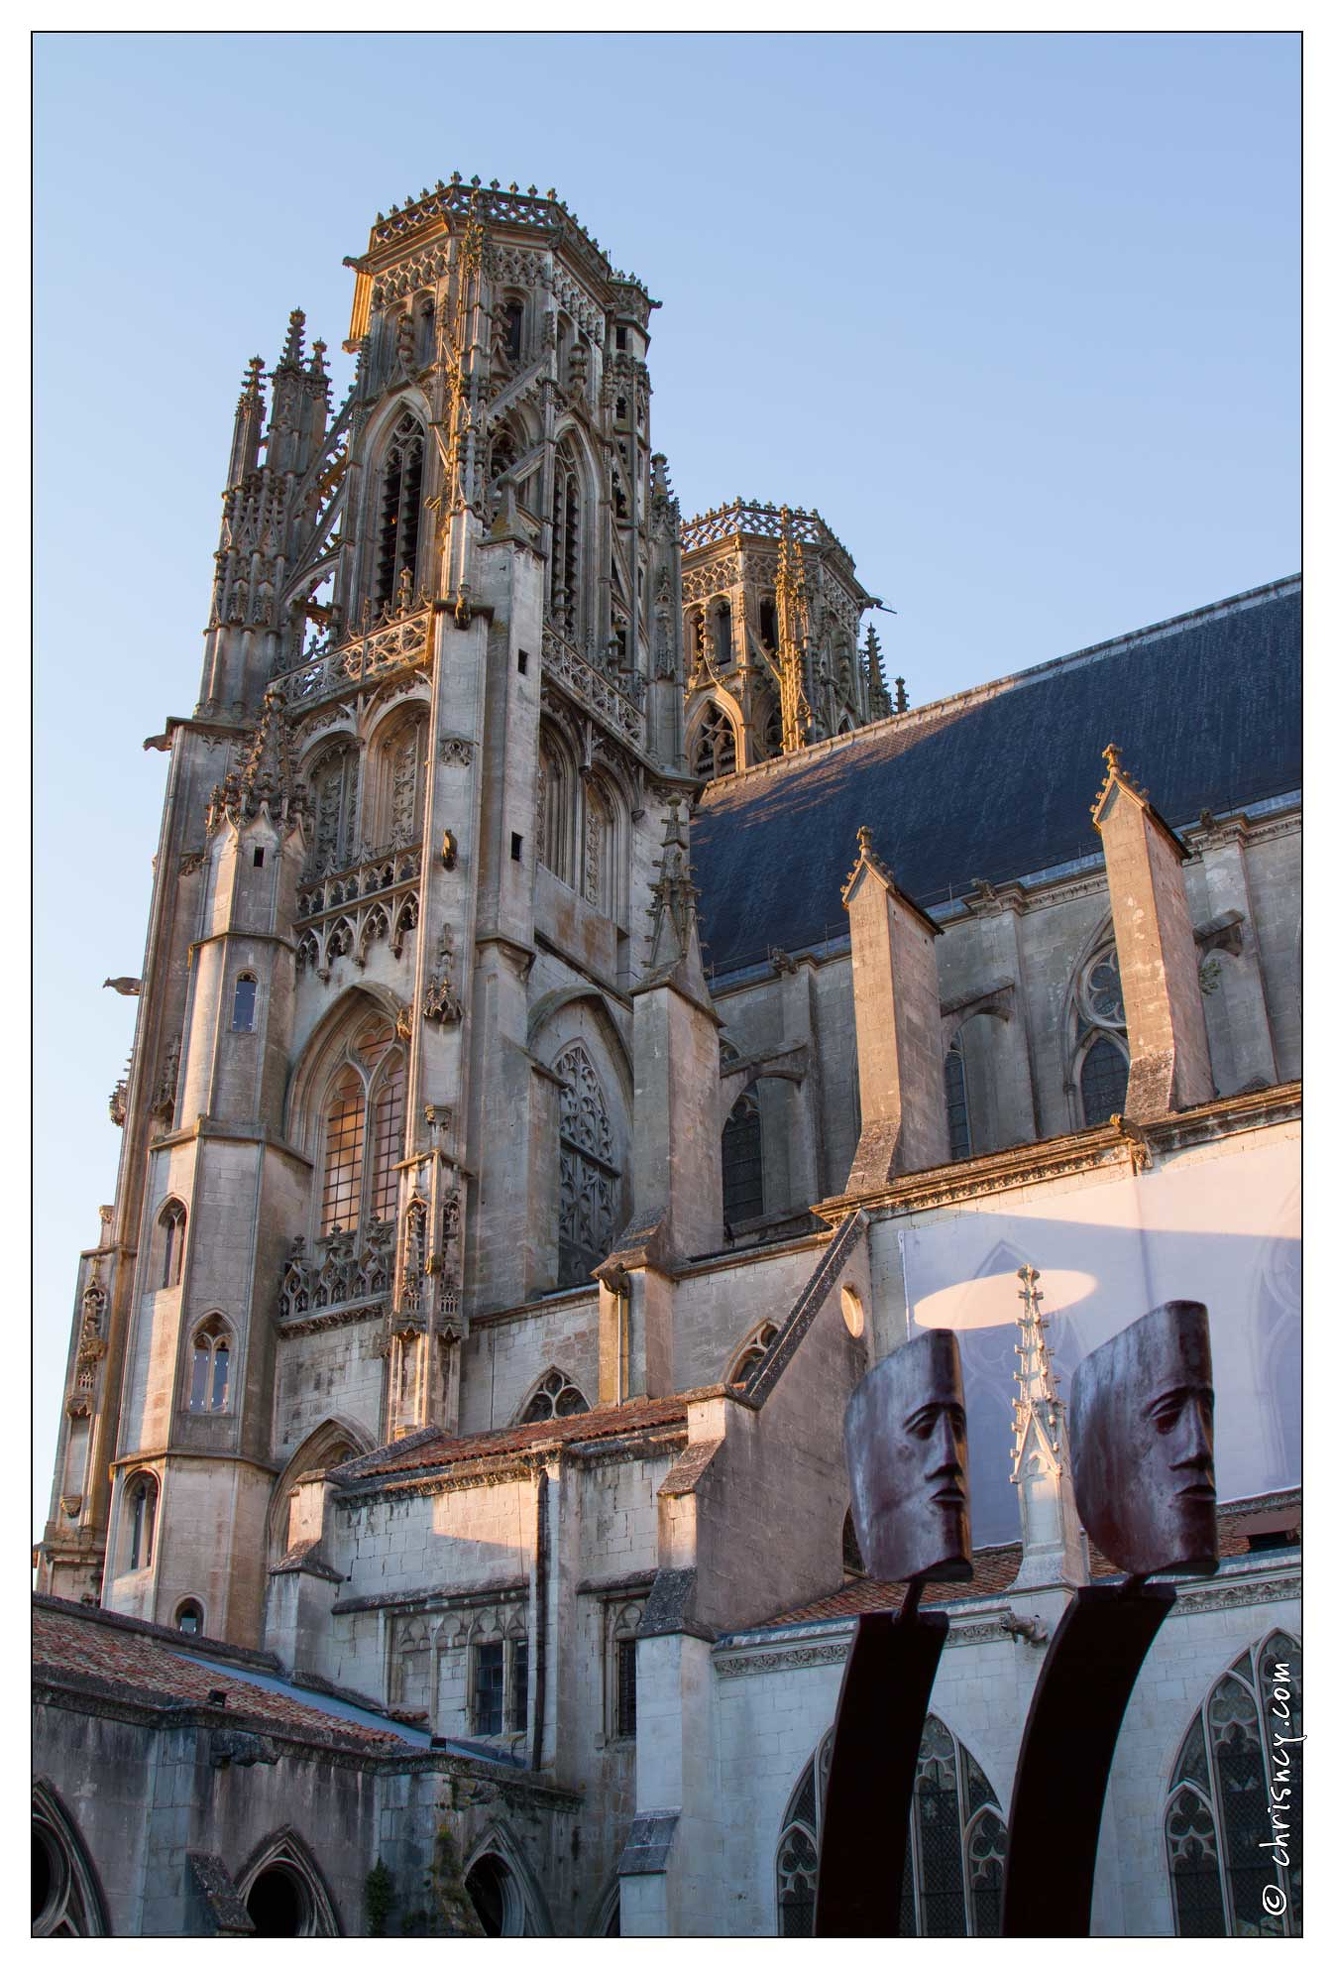 20100821-7429-Cathedrale_Toul.jpg